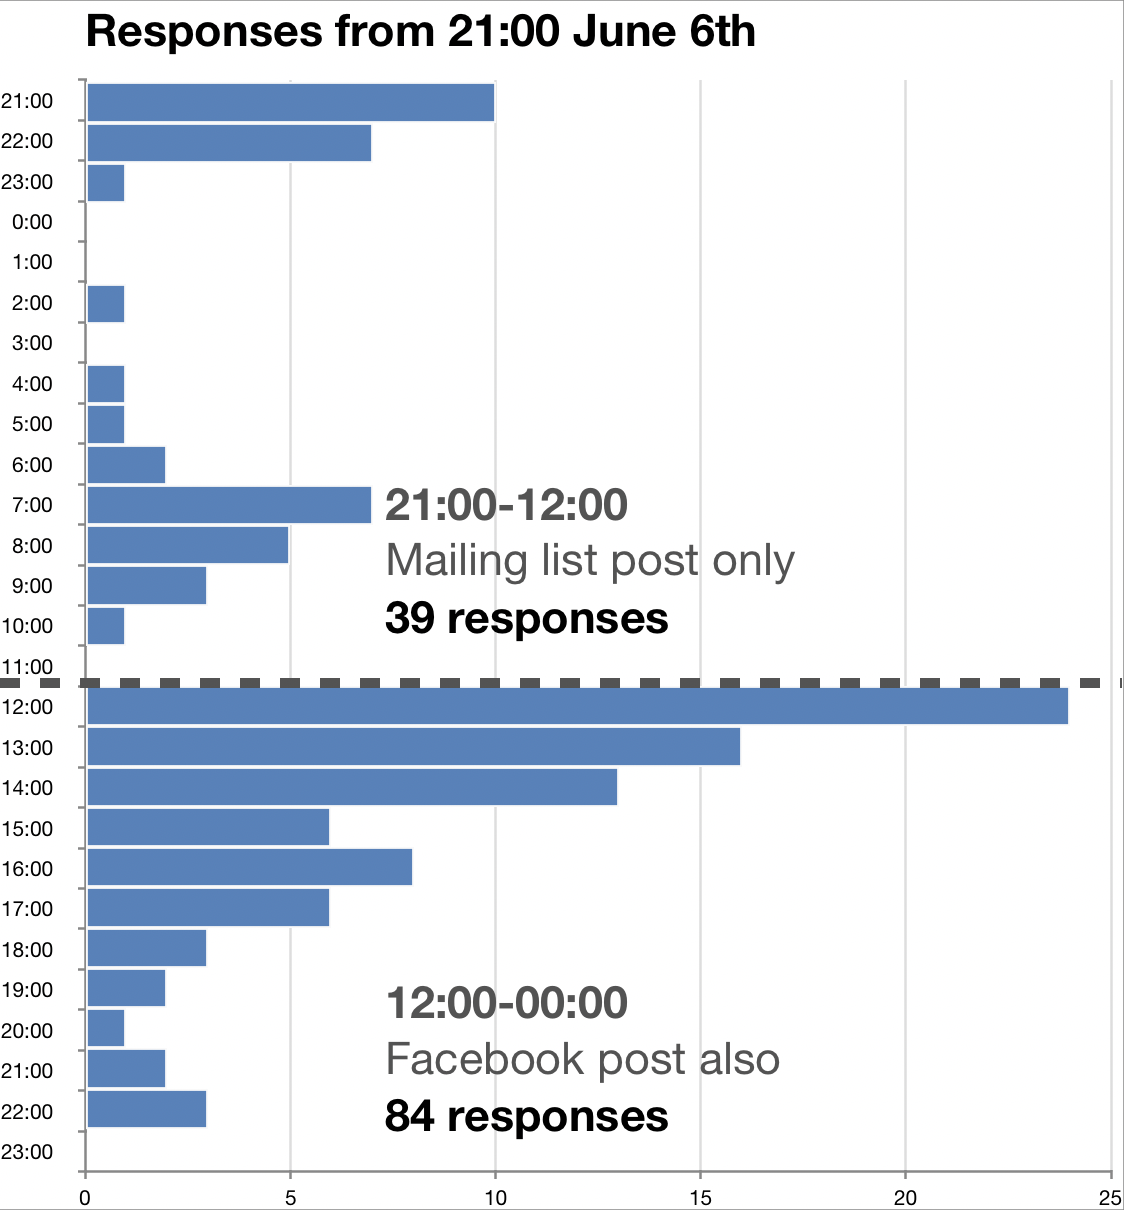 Chart: 39 responses from mailing list only, 84 the rest of the day